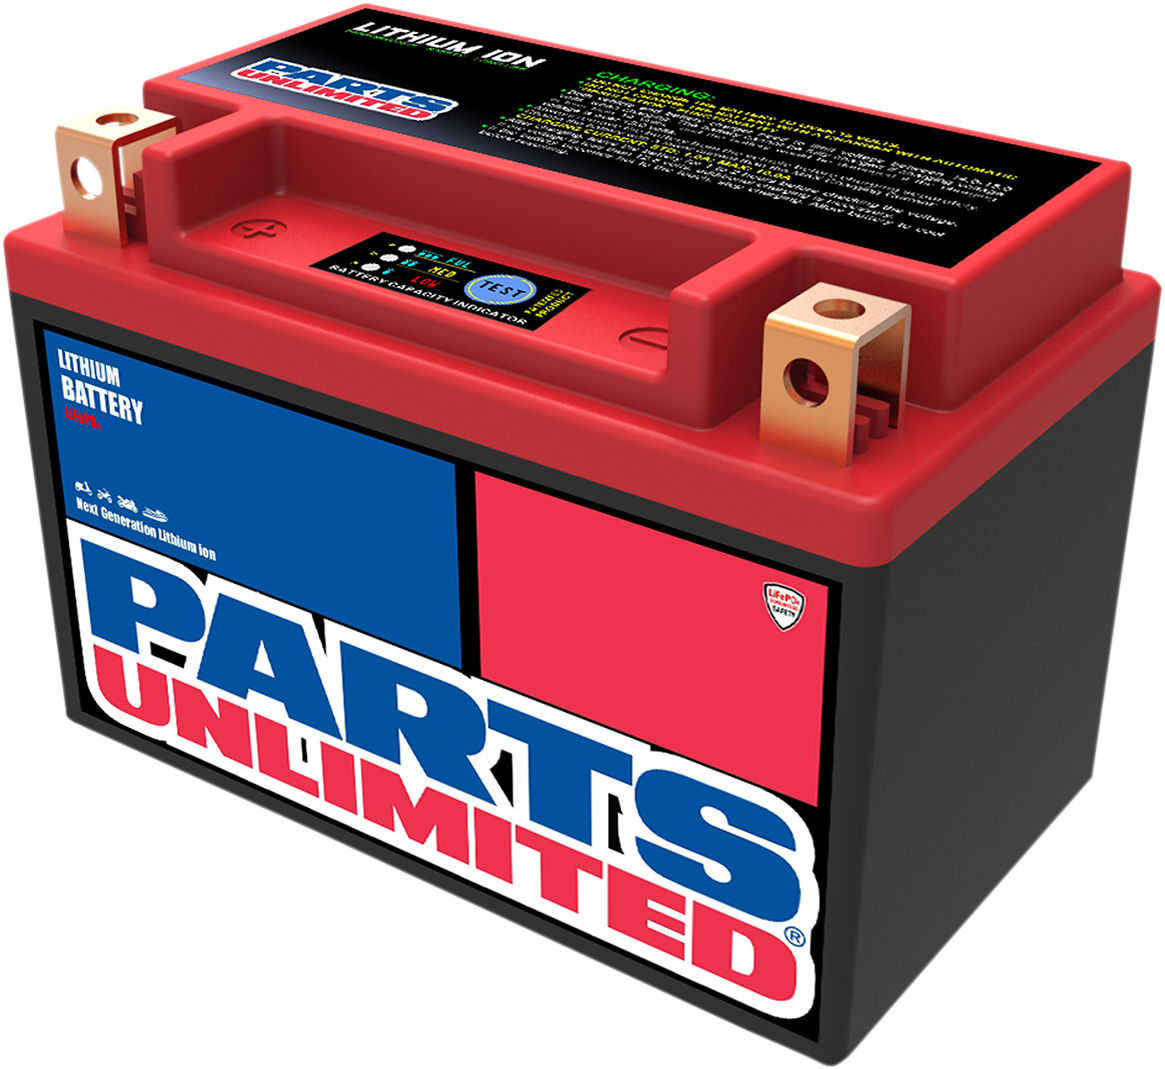 PARTS UNLIMITED Lithium Ion Battery